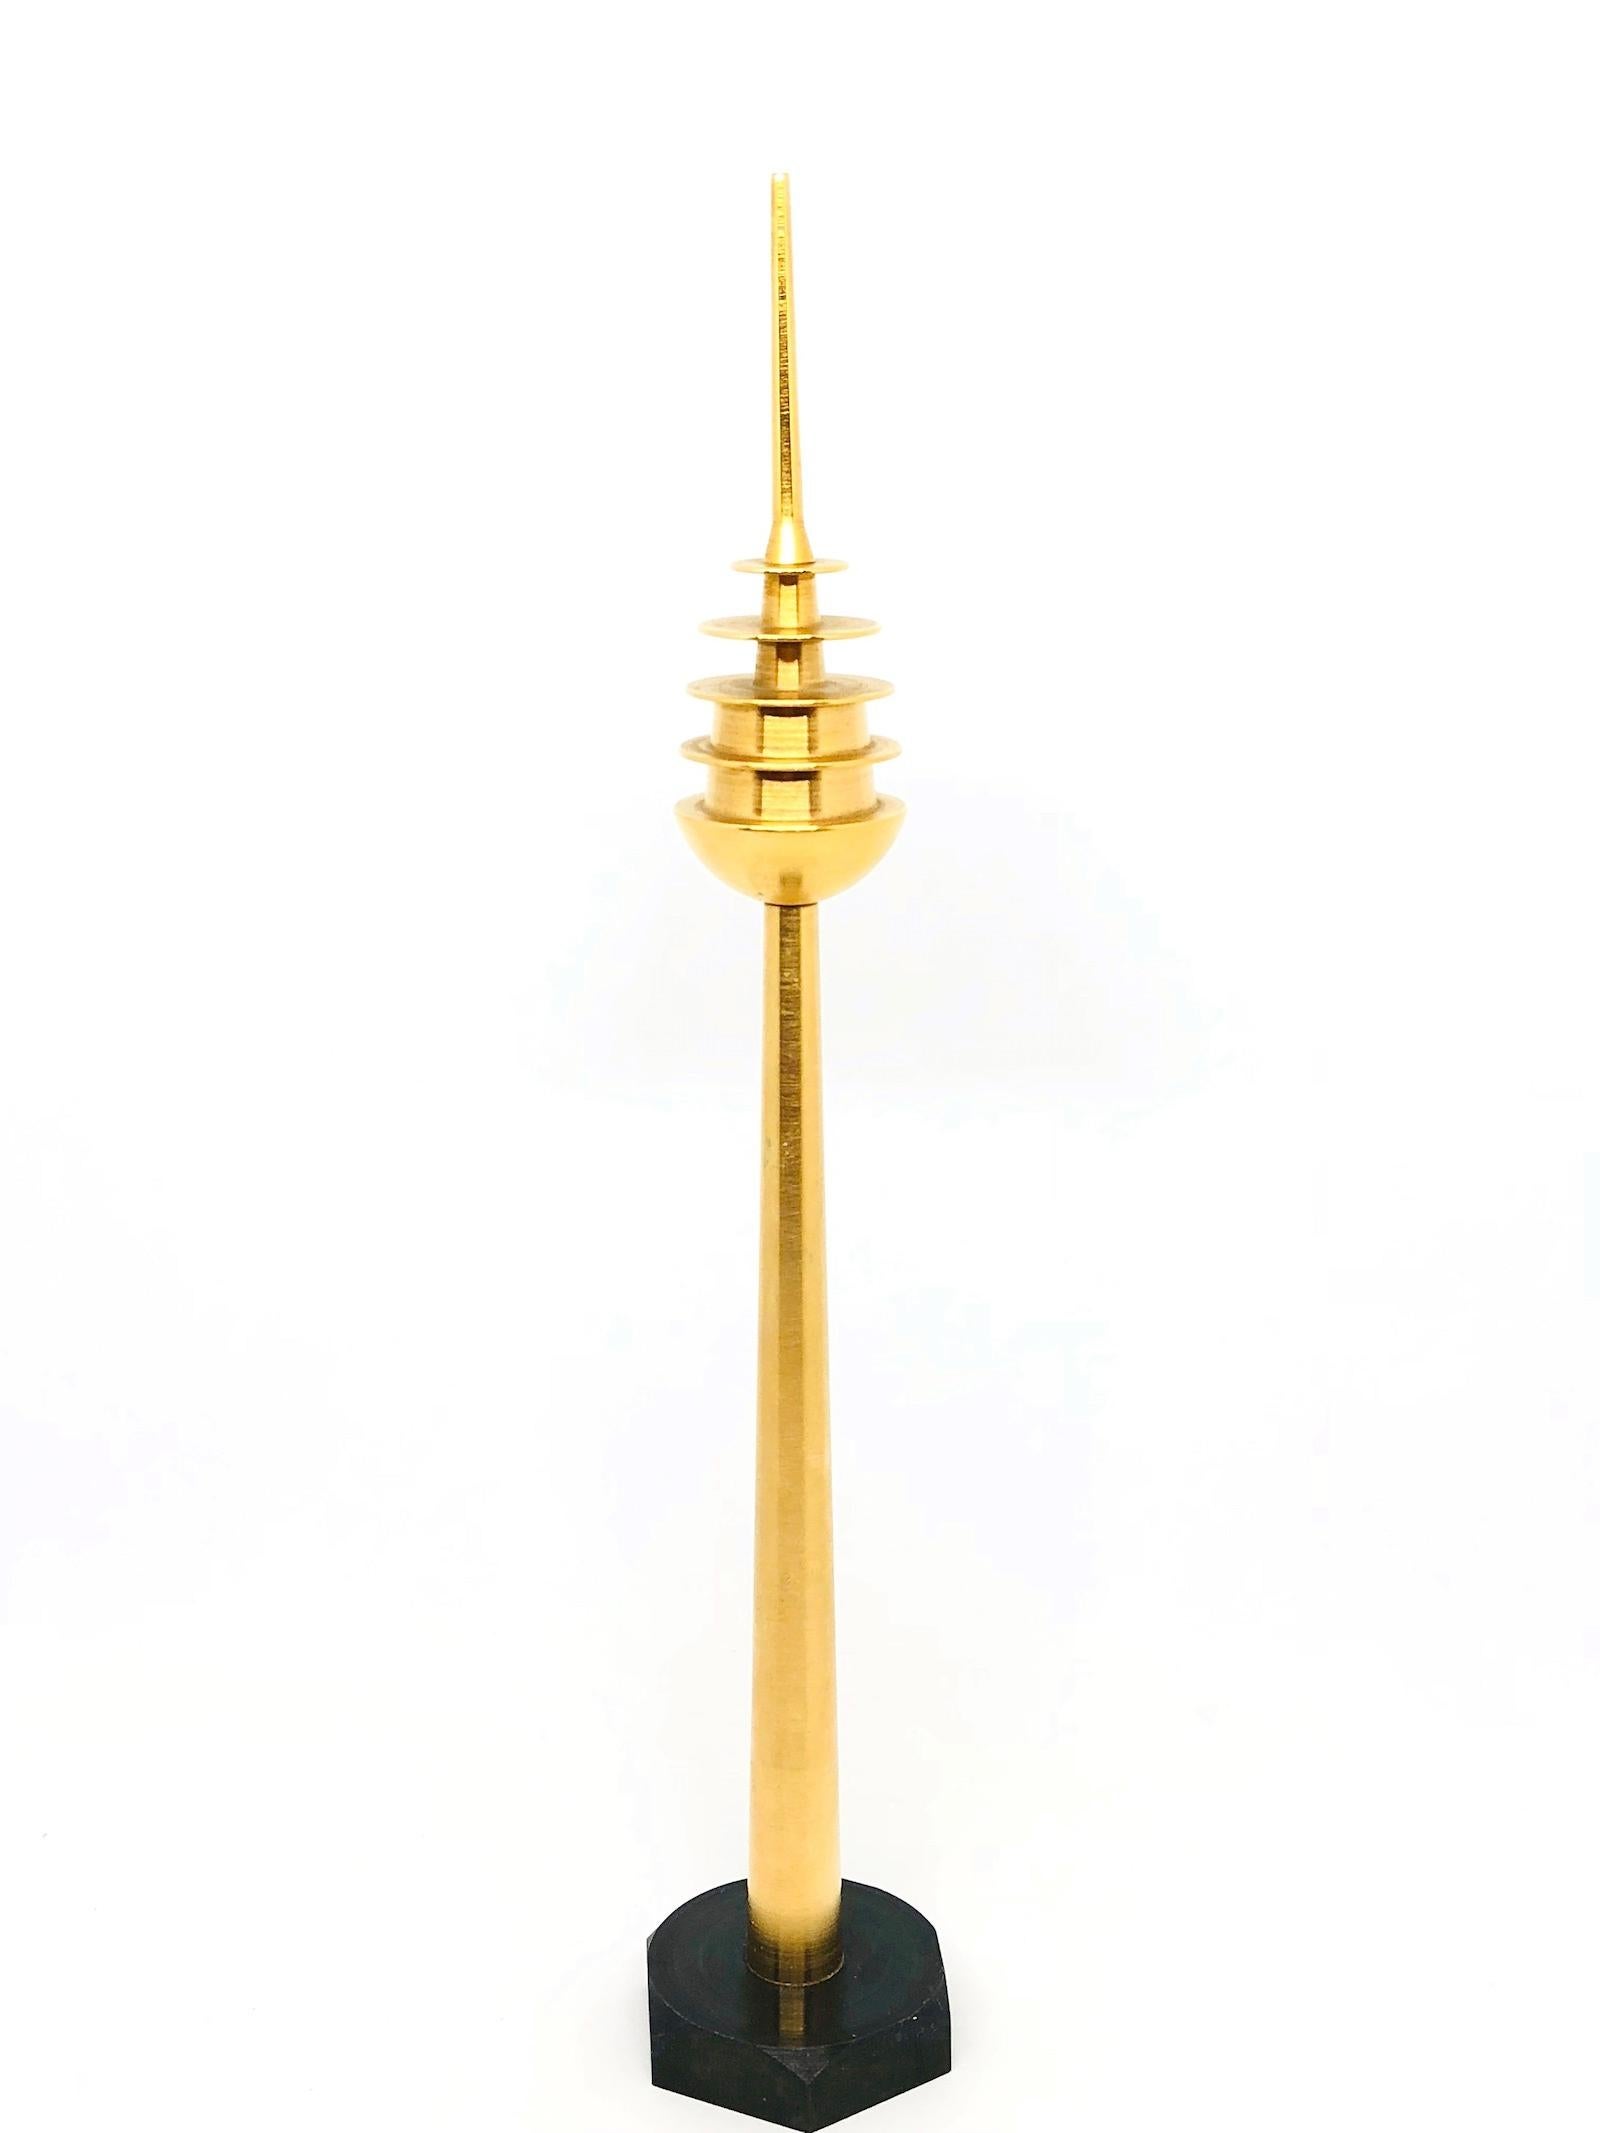 Scaled model of the Nuremberg television tower. Hand-spun in brass. A nice architectural sculpture for every living or man’s room.